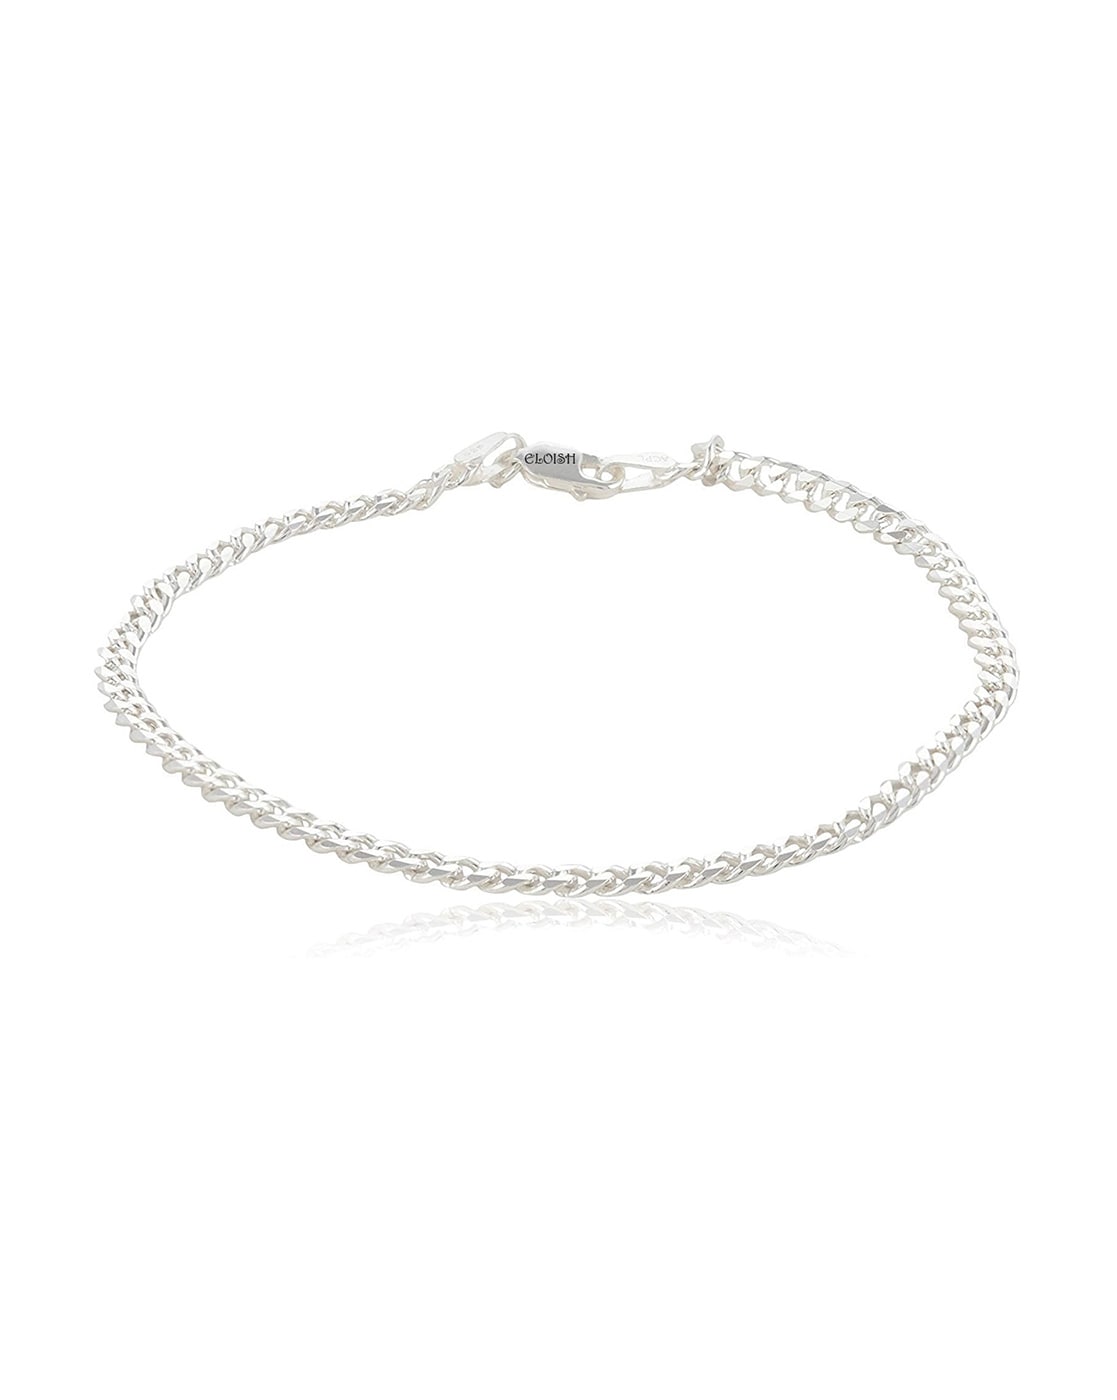 Buy Mesh Chain Classic Sterling Silver Chain Bracelet by Mannash Jewellery